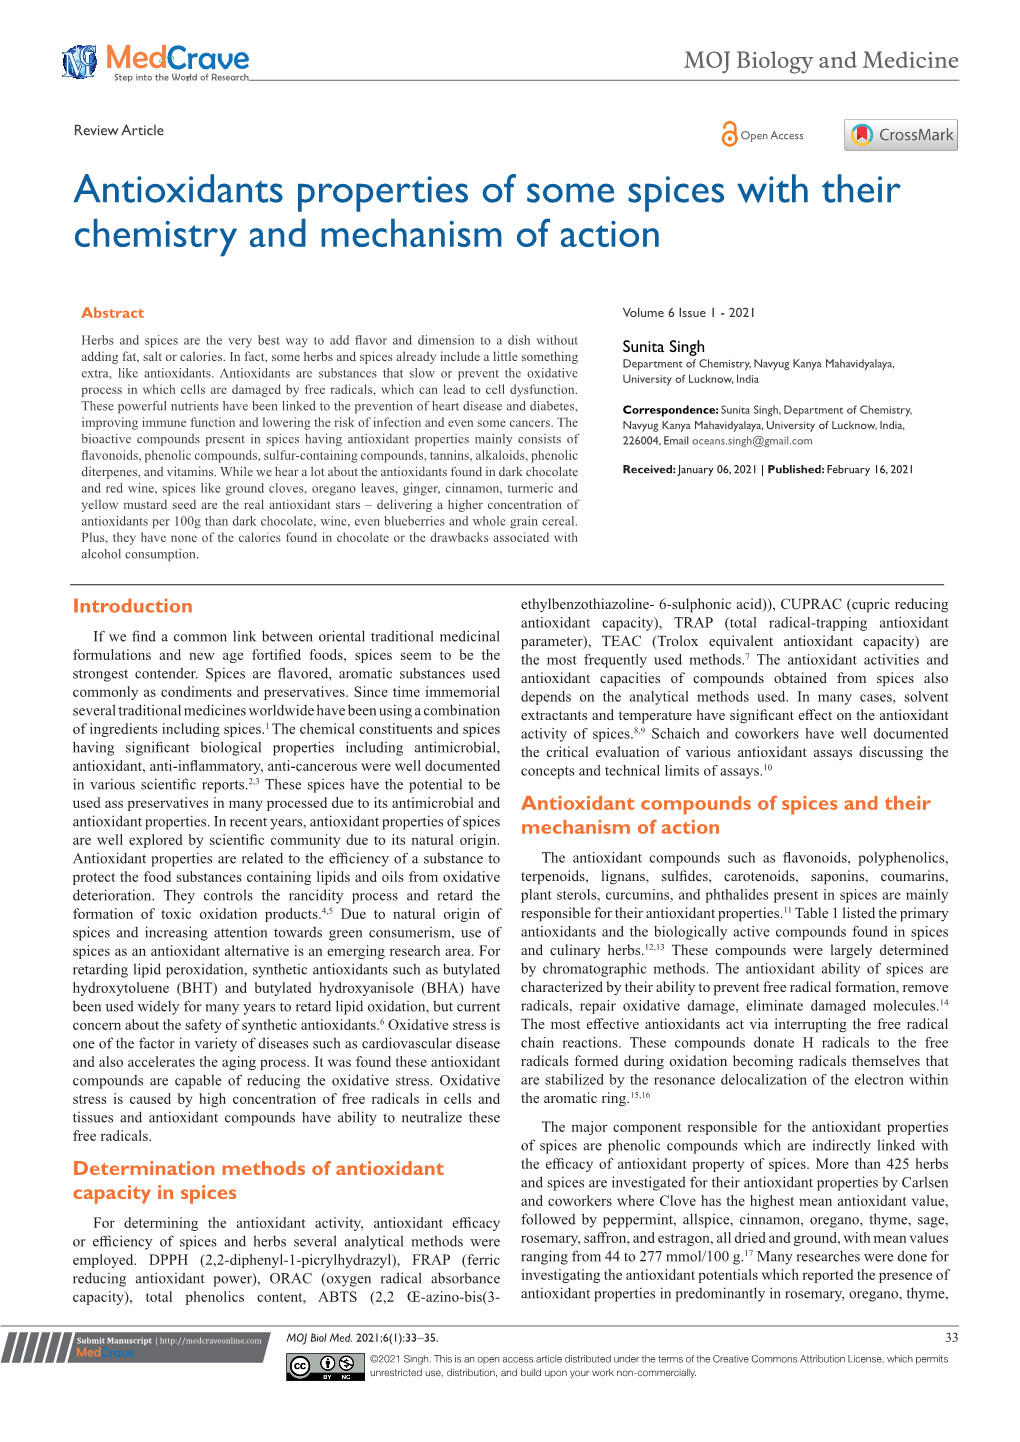 Antioxidants Properties of Some Spices with Their Chemistry and Mechanism of Action